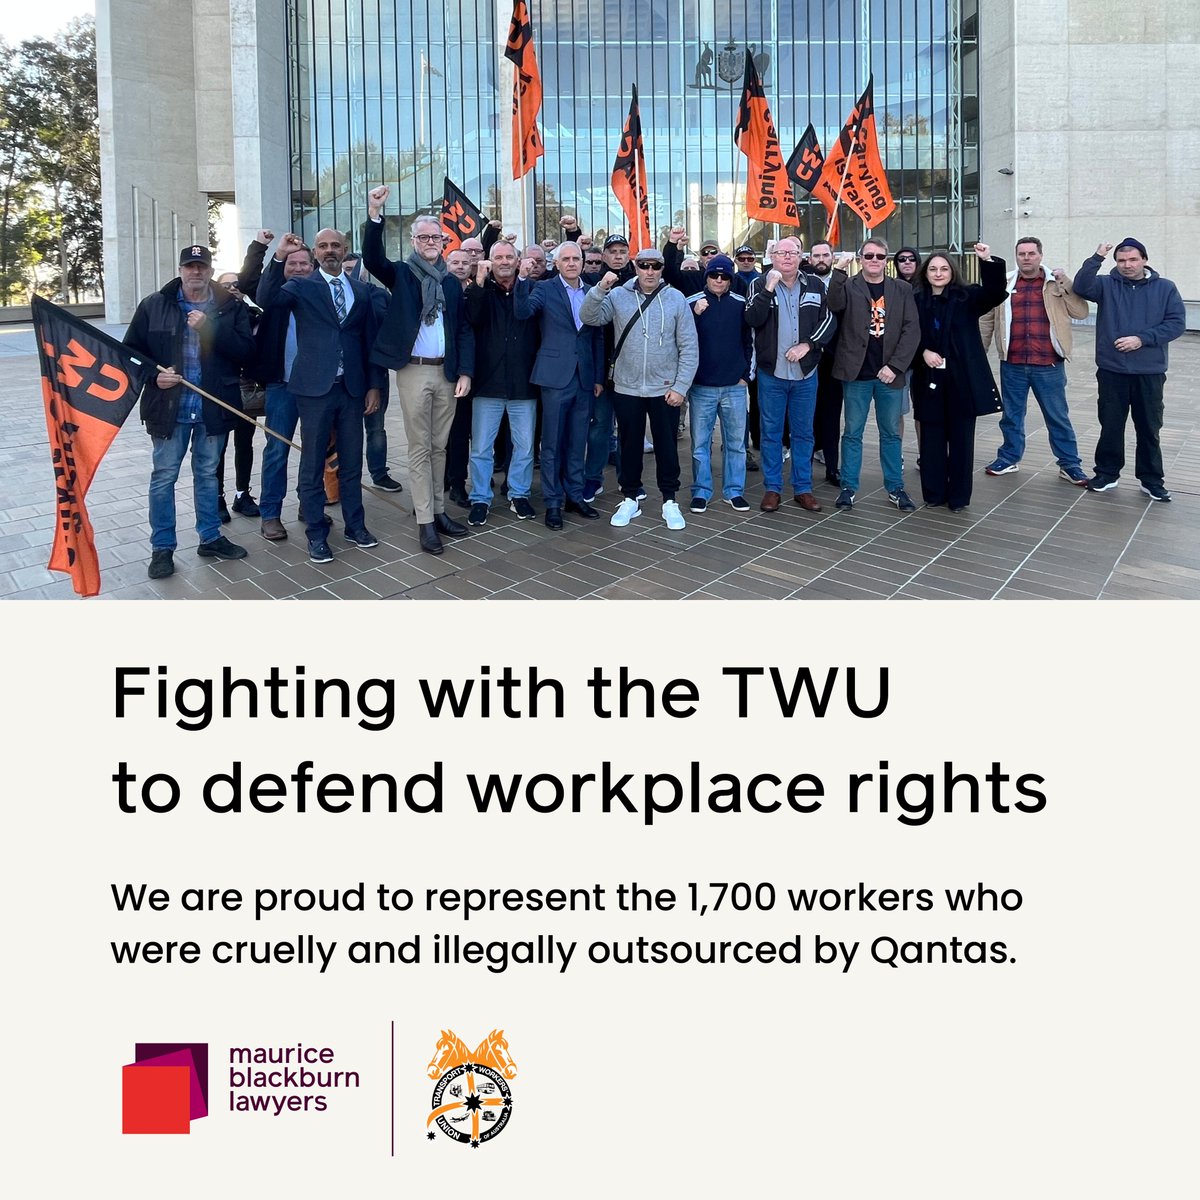 It’s not often as a practitioner you get to the High Court so it was a privilege to represent the mighty TWU and 1,700 workers this week at their High Court hearing against Qantas. ✊🏽 🧵

#IndustrialLaw #WorkplaceRights #UnionStrong